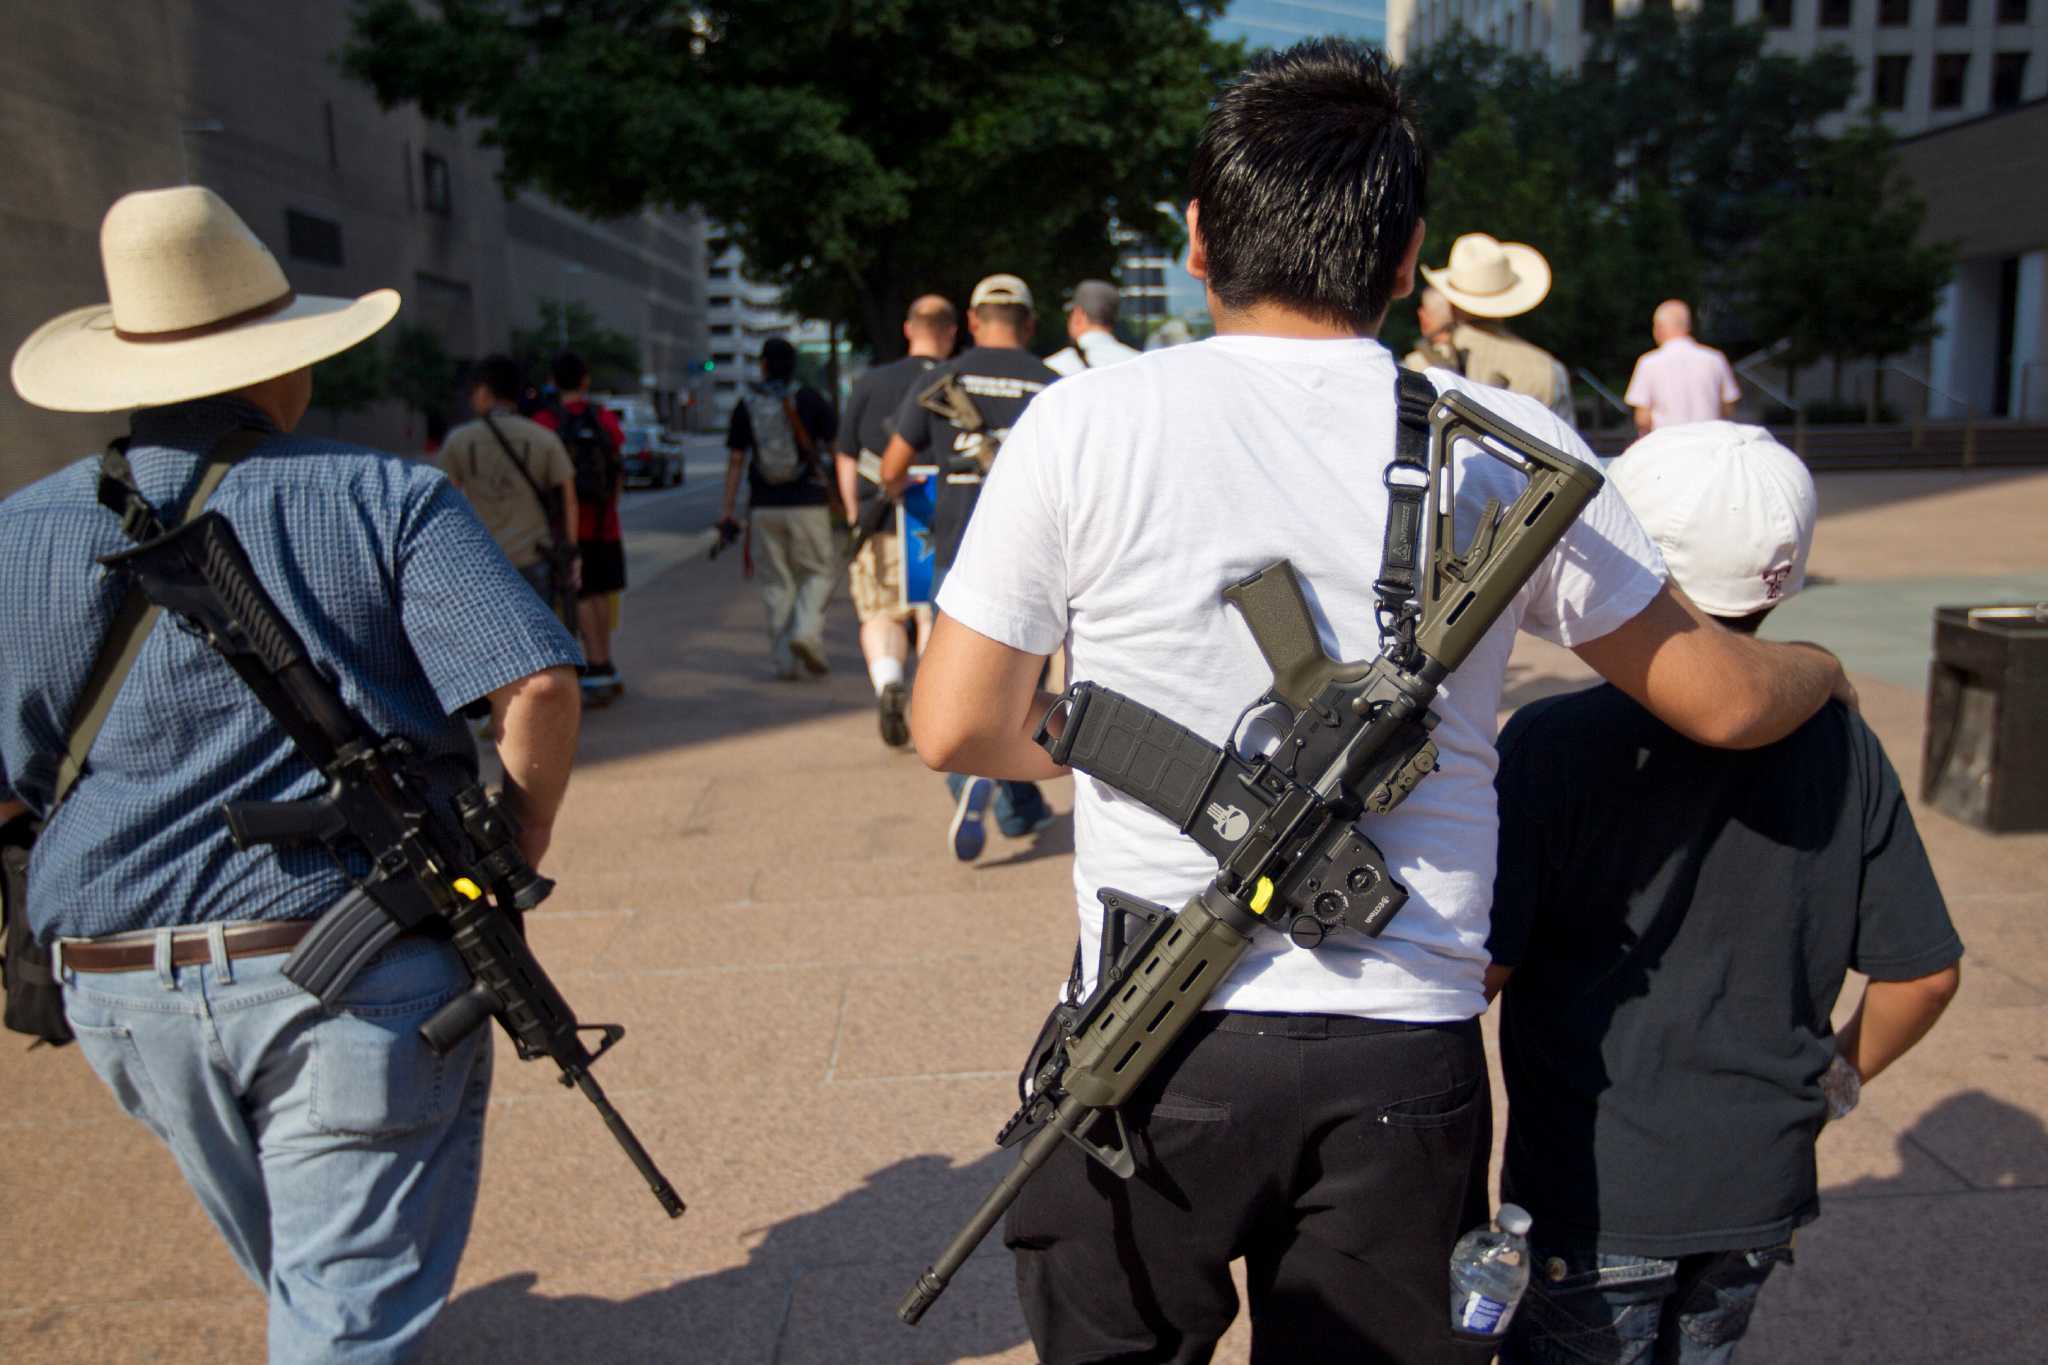 While Texas holds out, majority of U.S. allows open carry